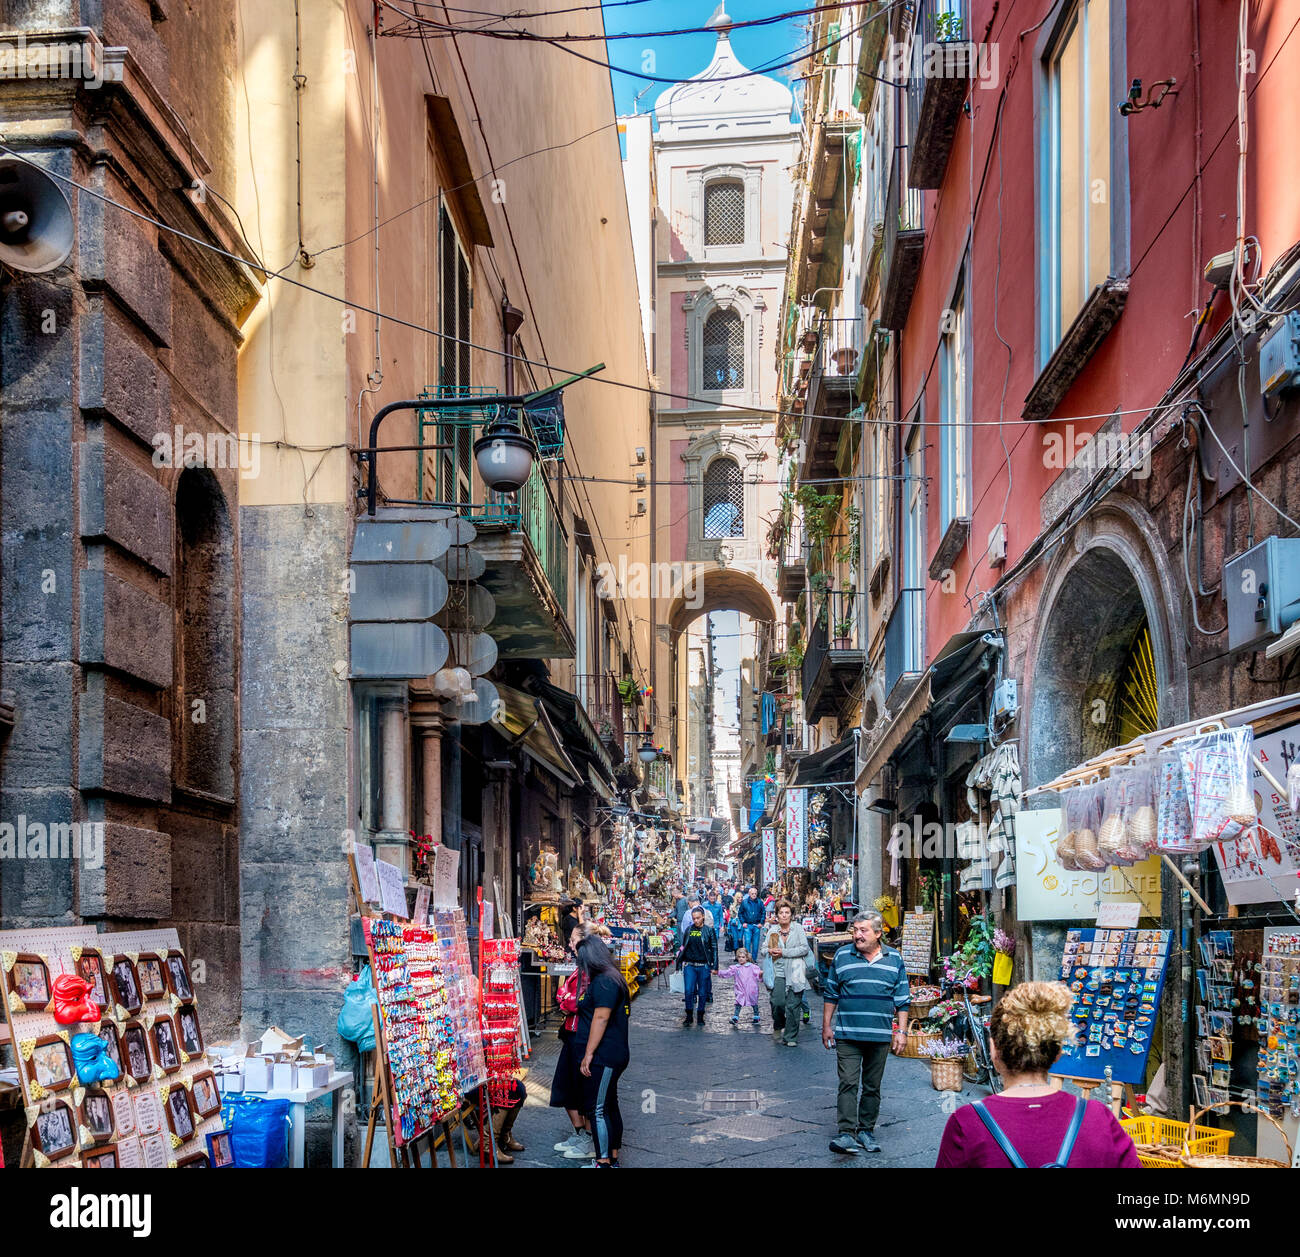 Narrow tourist street with gift shops in Naples, Italy Stock Photo: 176247385 - Alamy